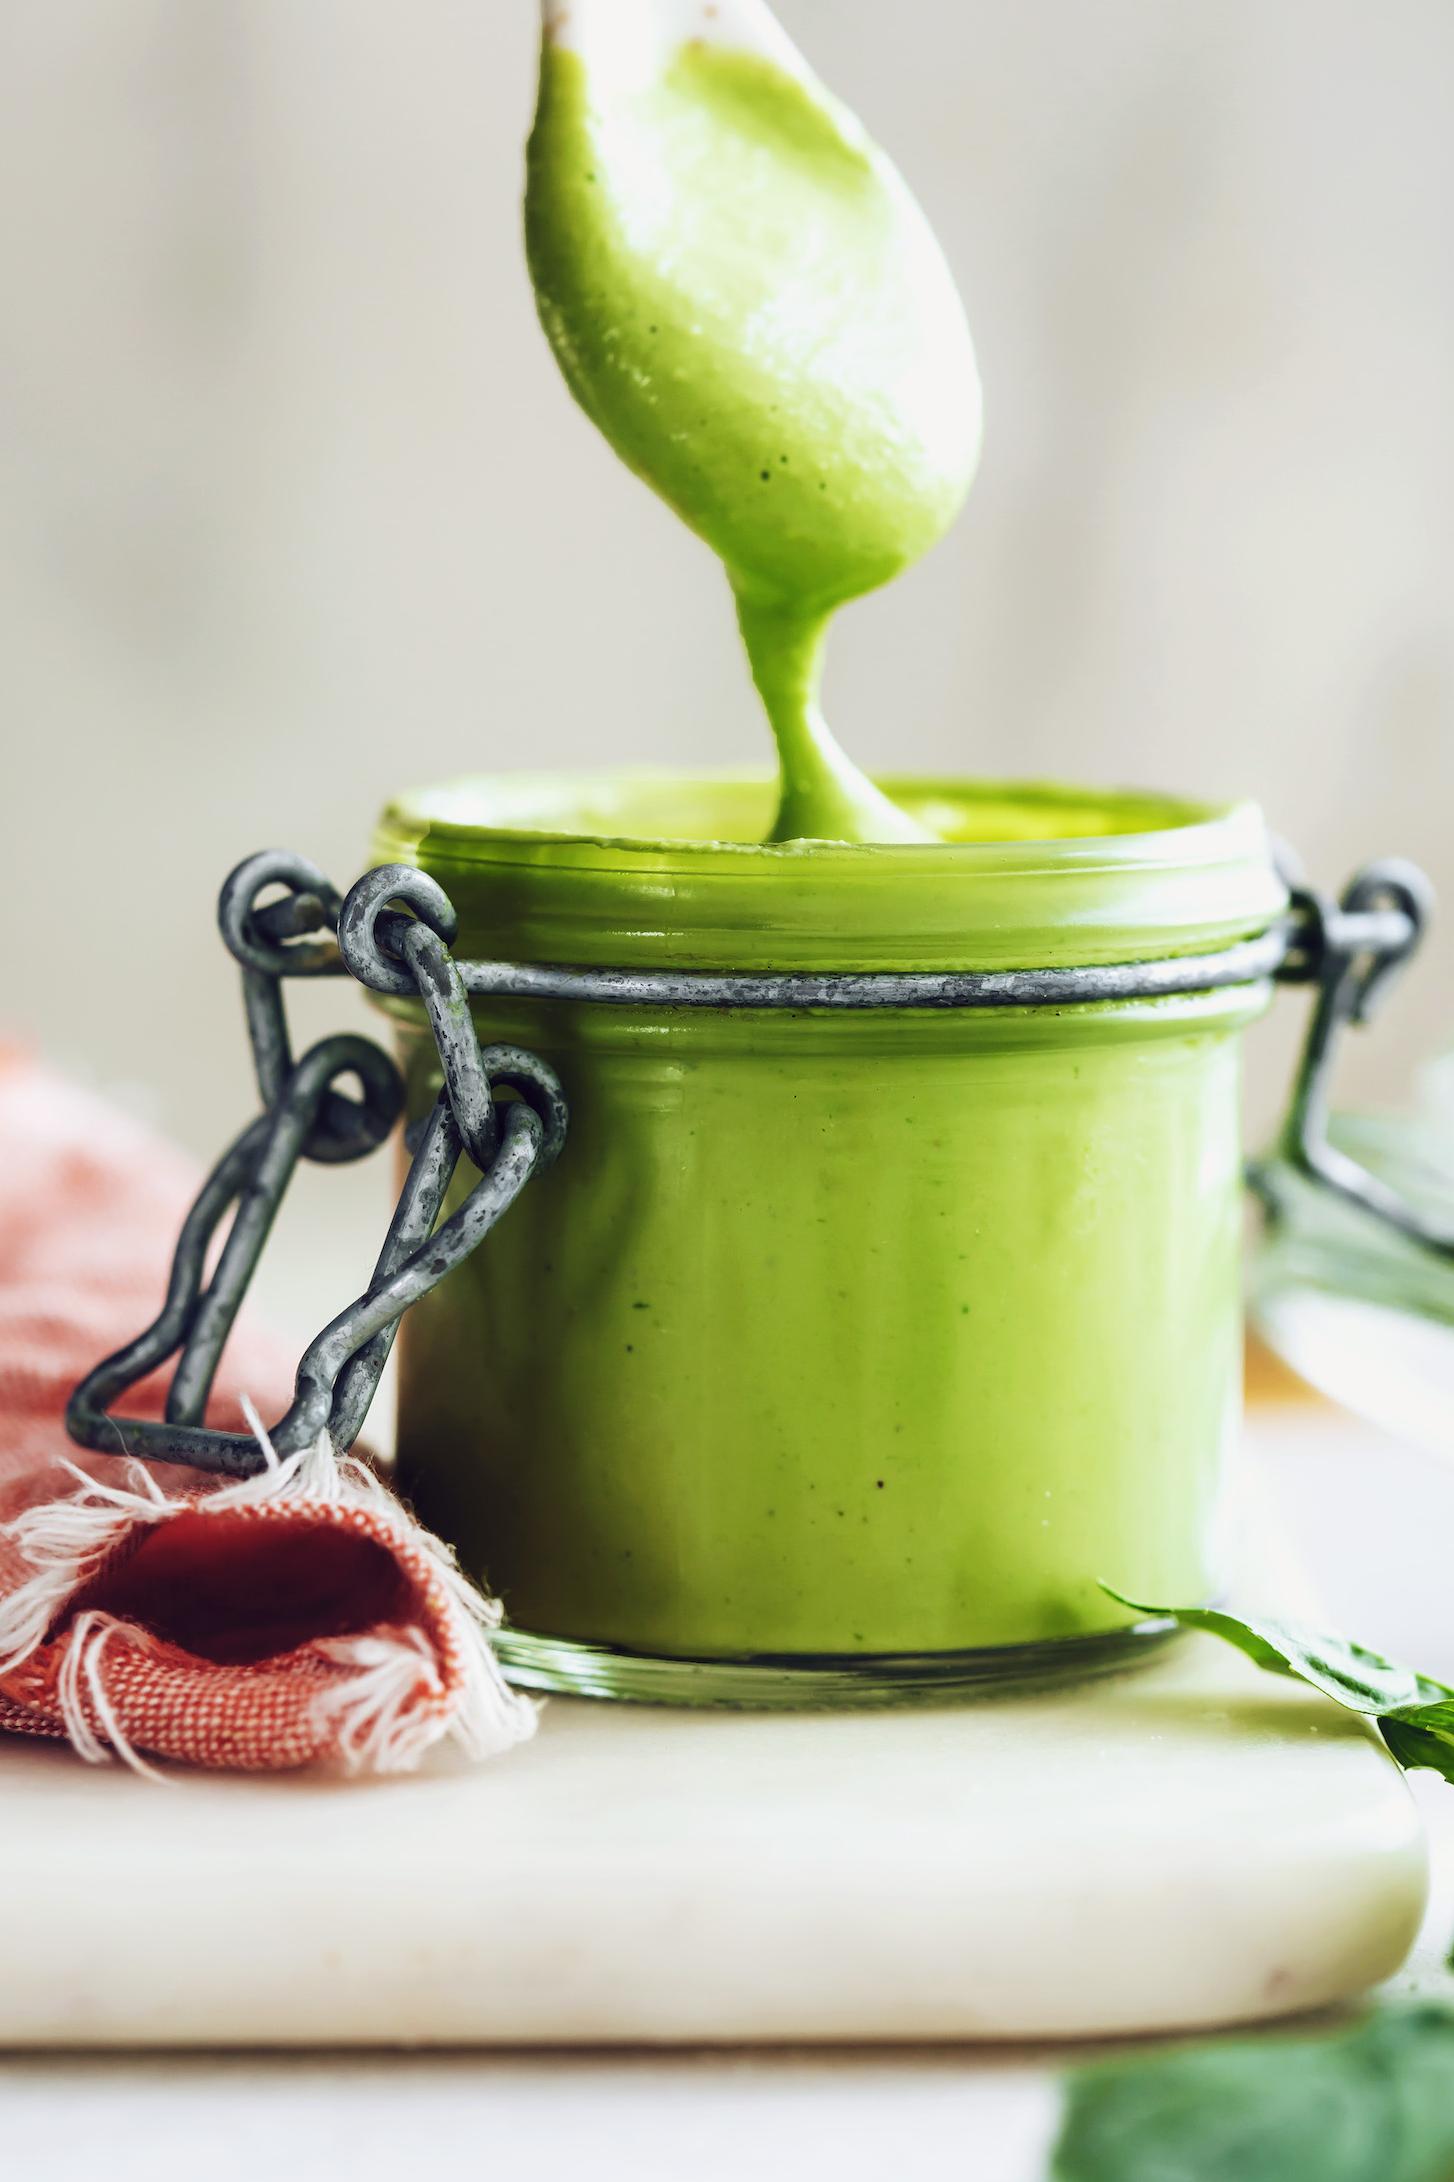  Get ready to add some green magic to your salads with this Green Goddess Dressing recipe!